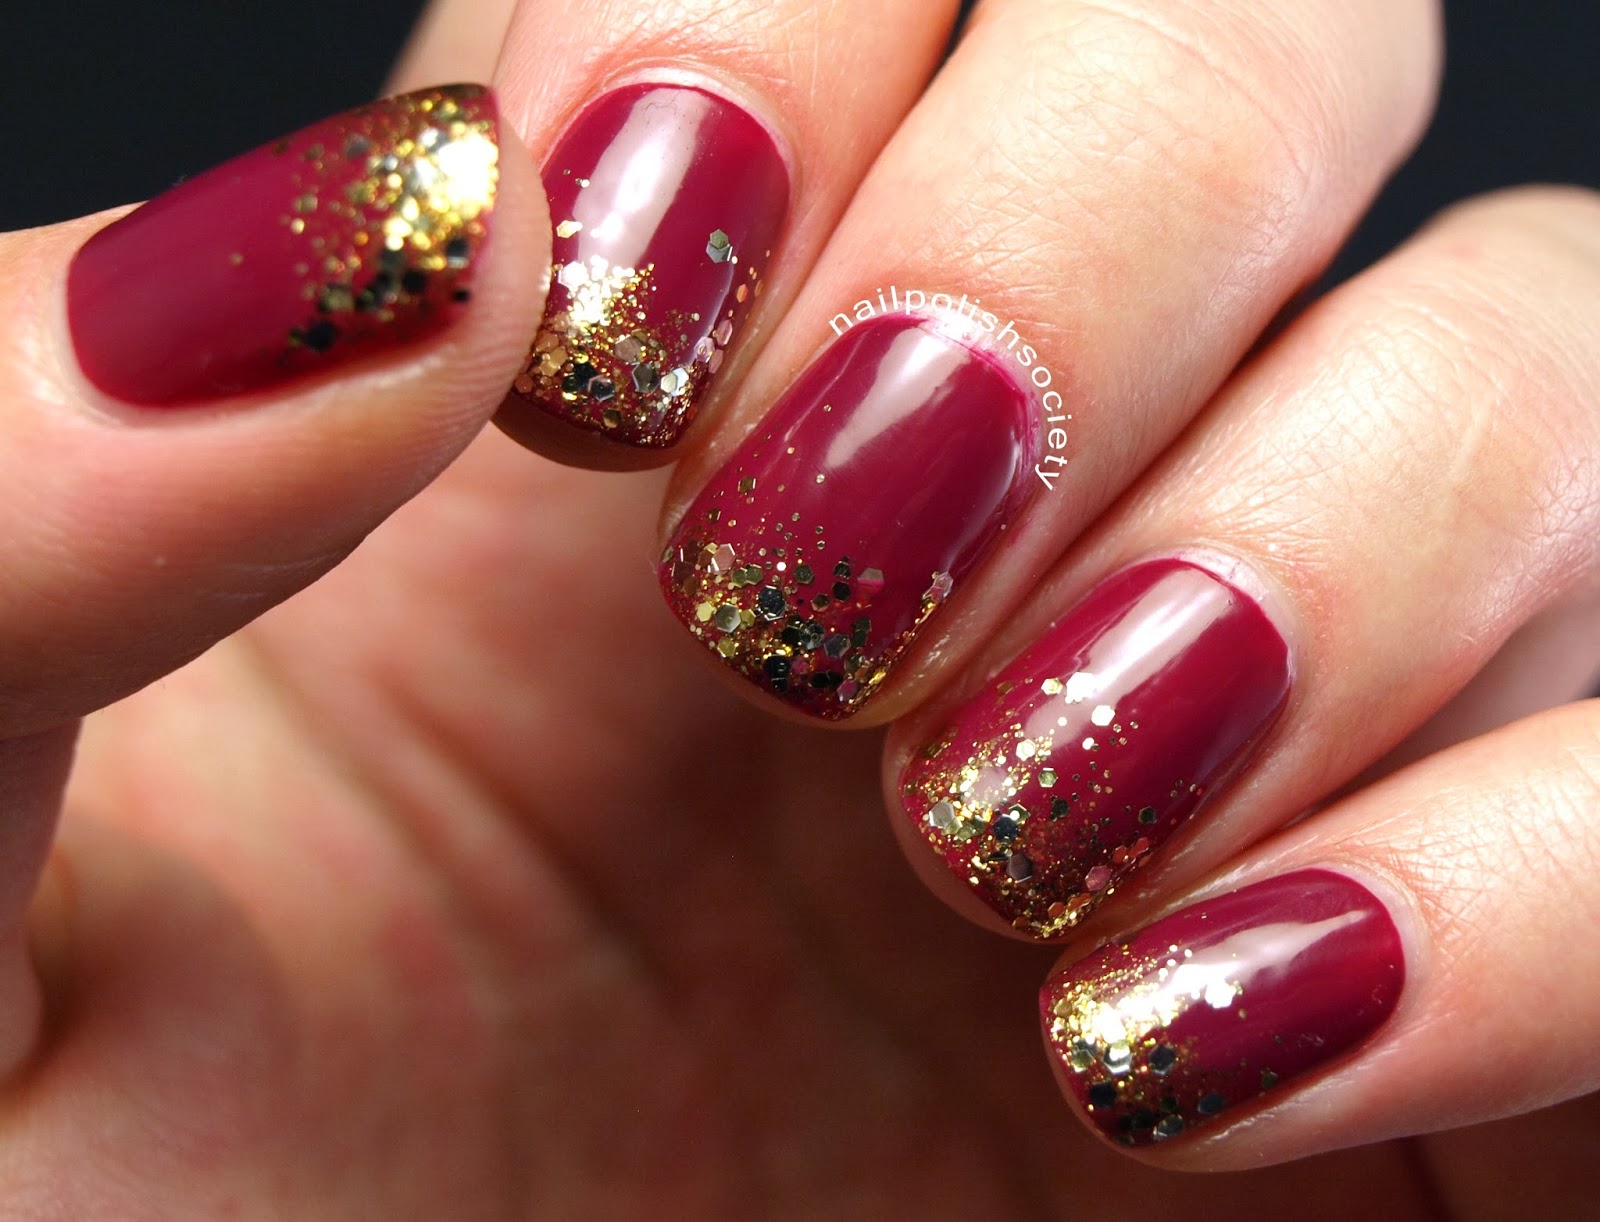 8. "Festive Holiday Nail Colors in a Whimsical Still Life" - wide 5